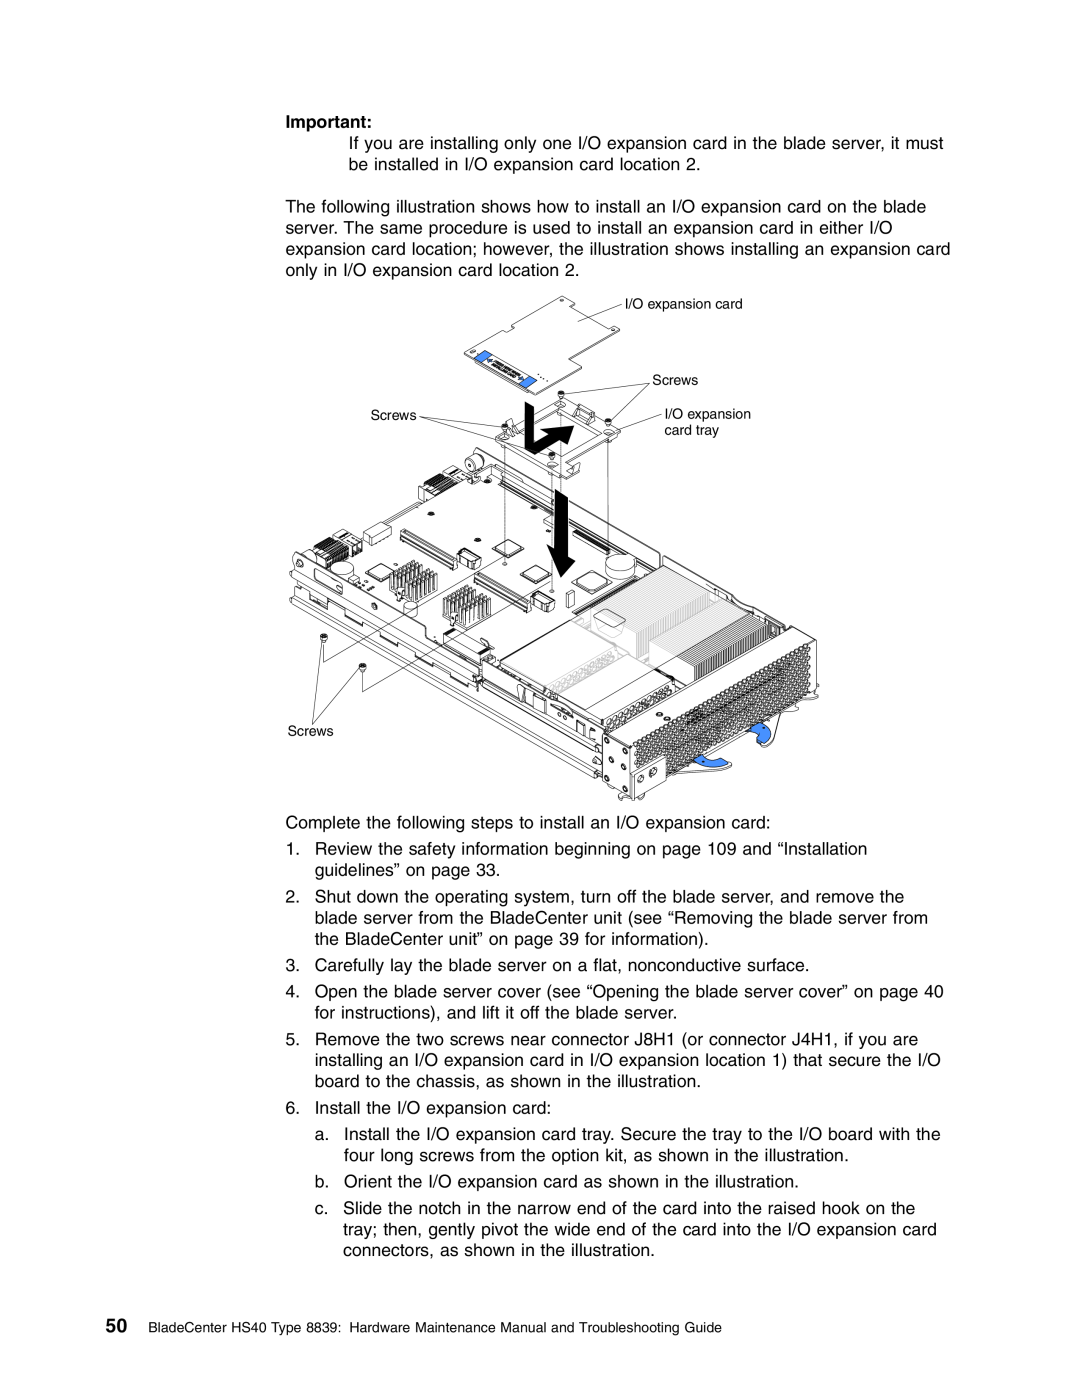 IBM HS40 manual Complete the following steps to install an I/O expansion card 